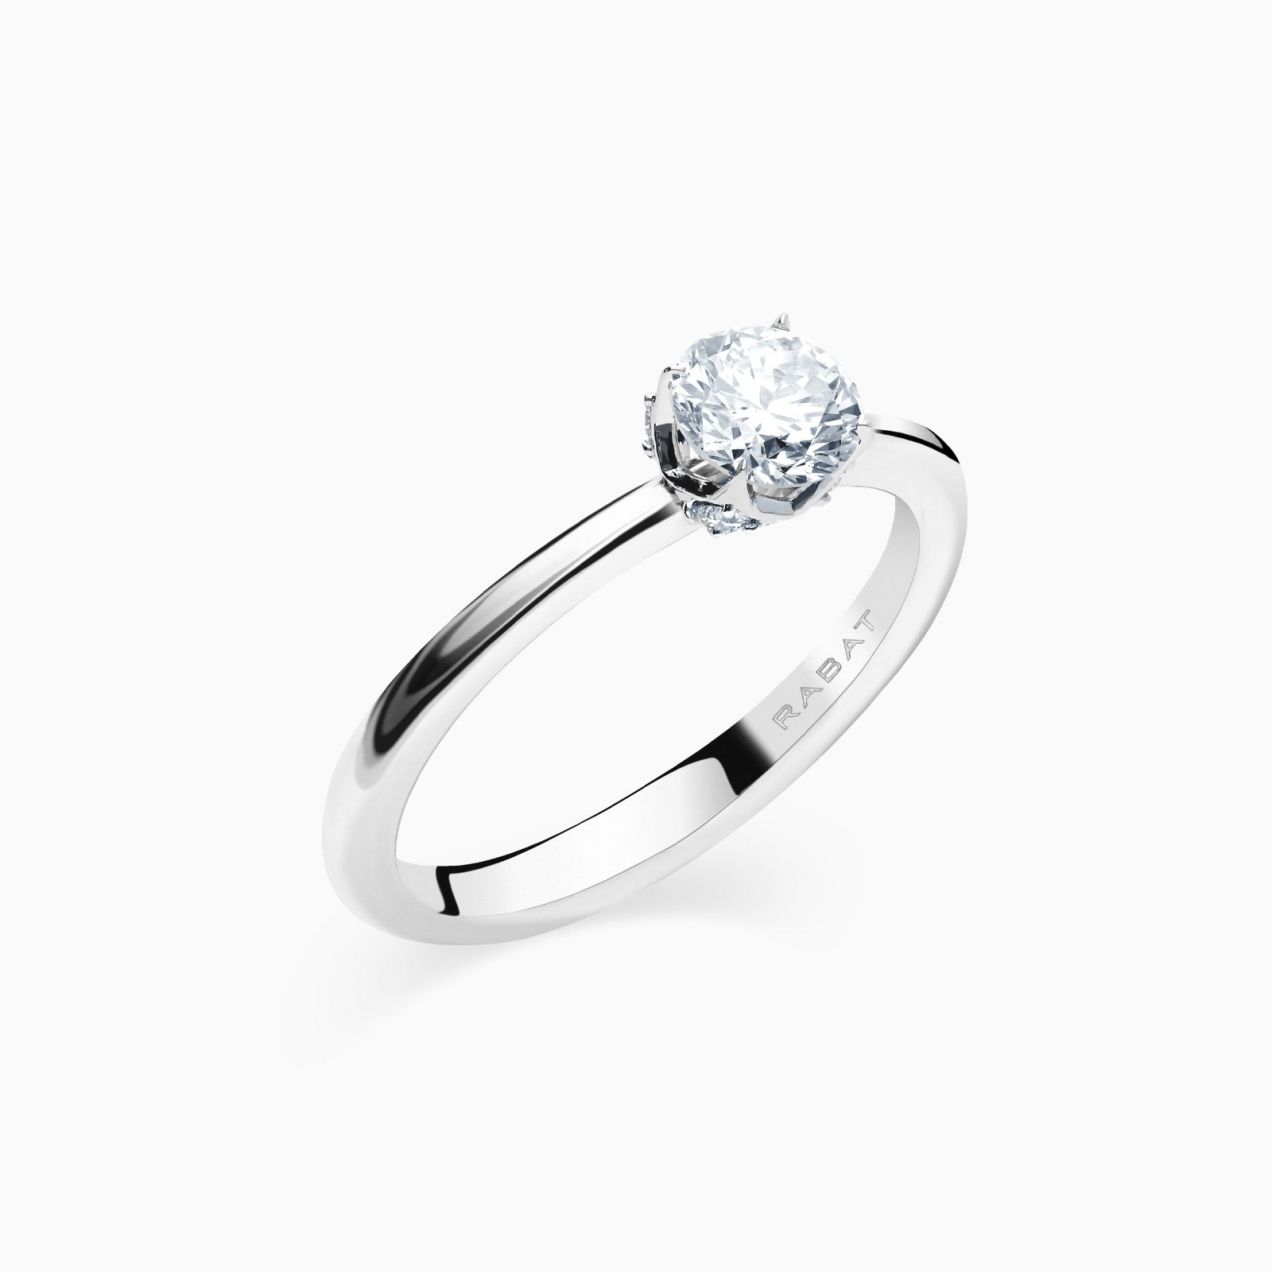 Solitaire ring in white gold with a central diamond and mini diamonds